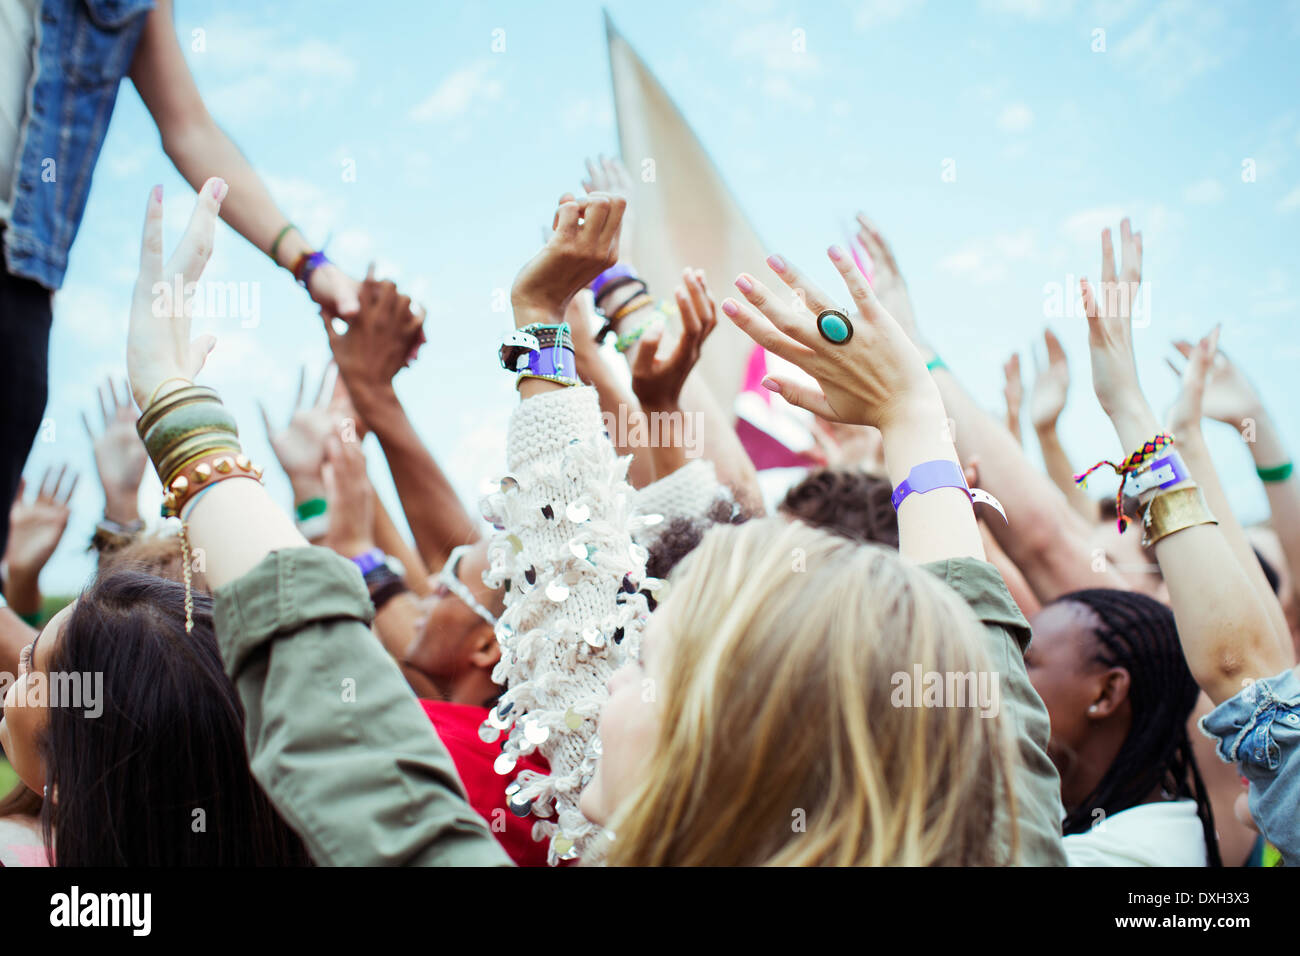 Fans reaching to shake hands with performer at music festival Stock Photo